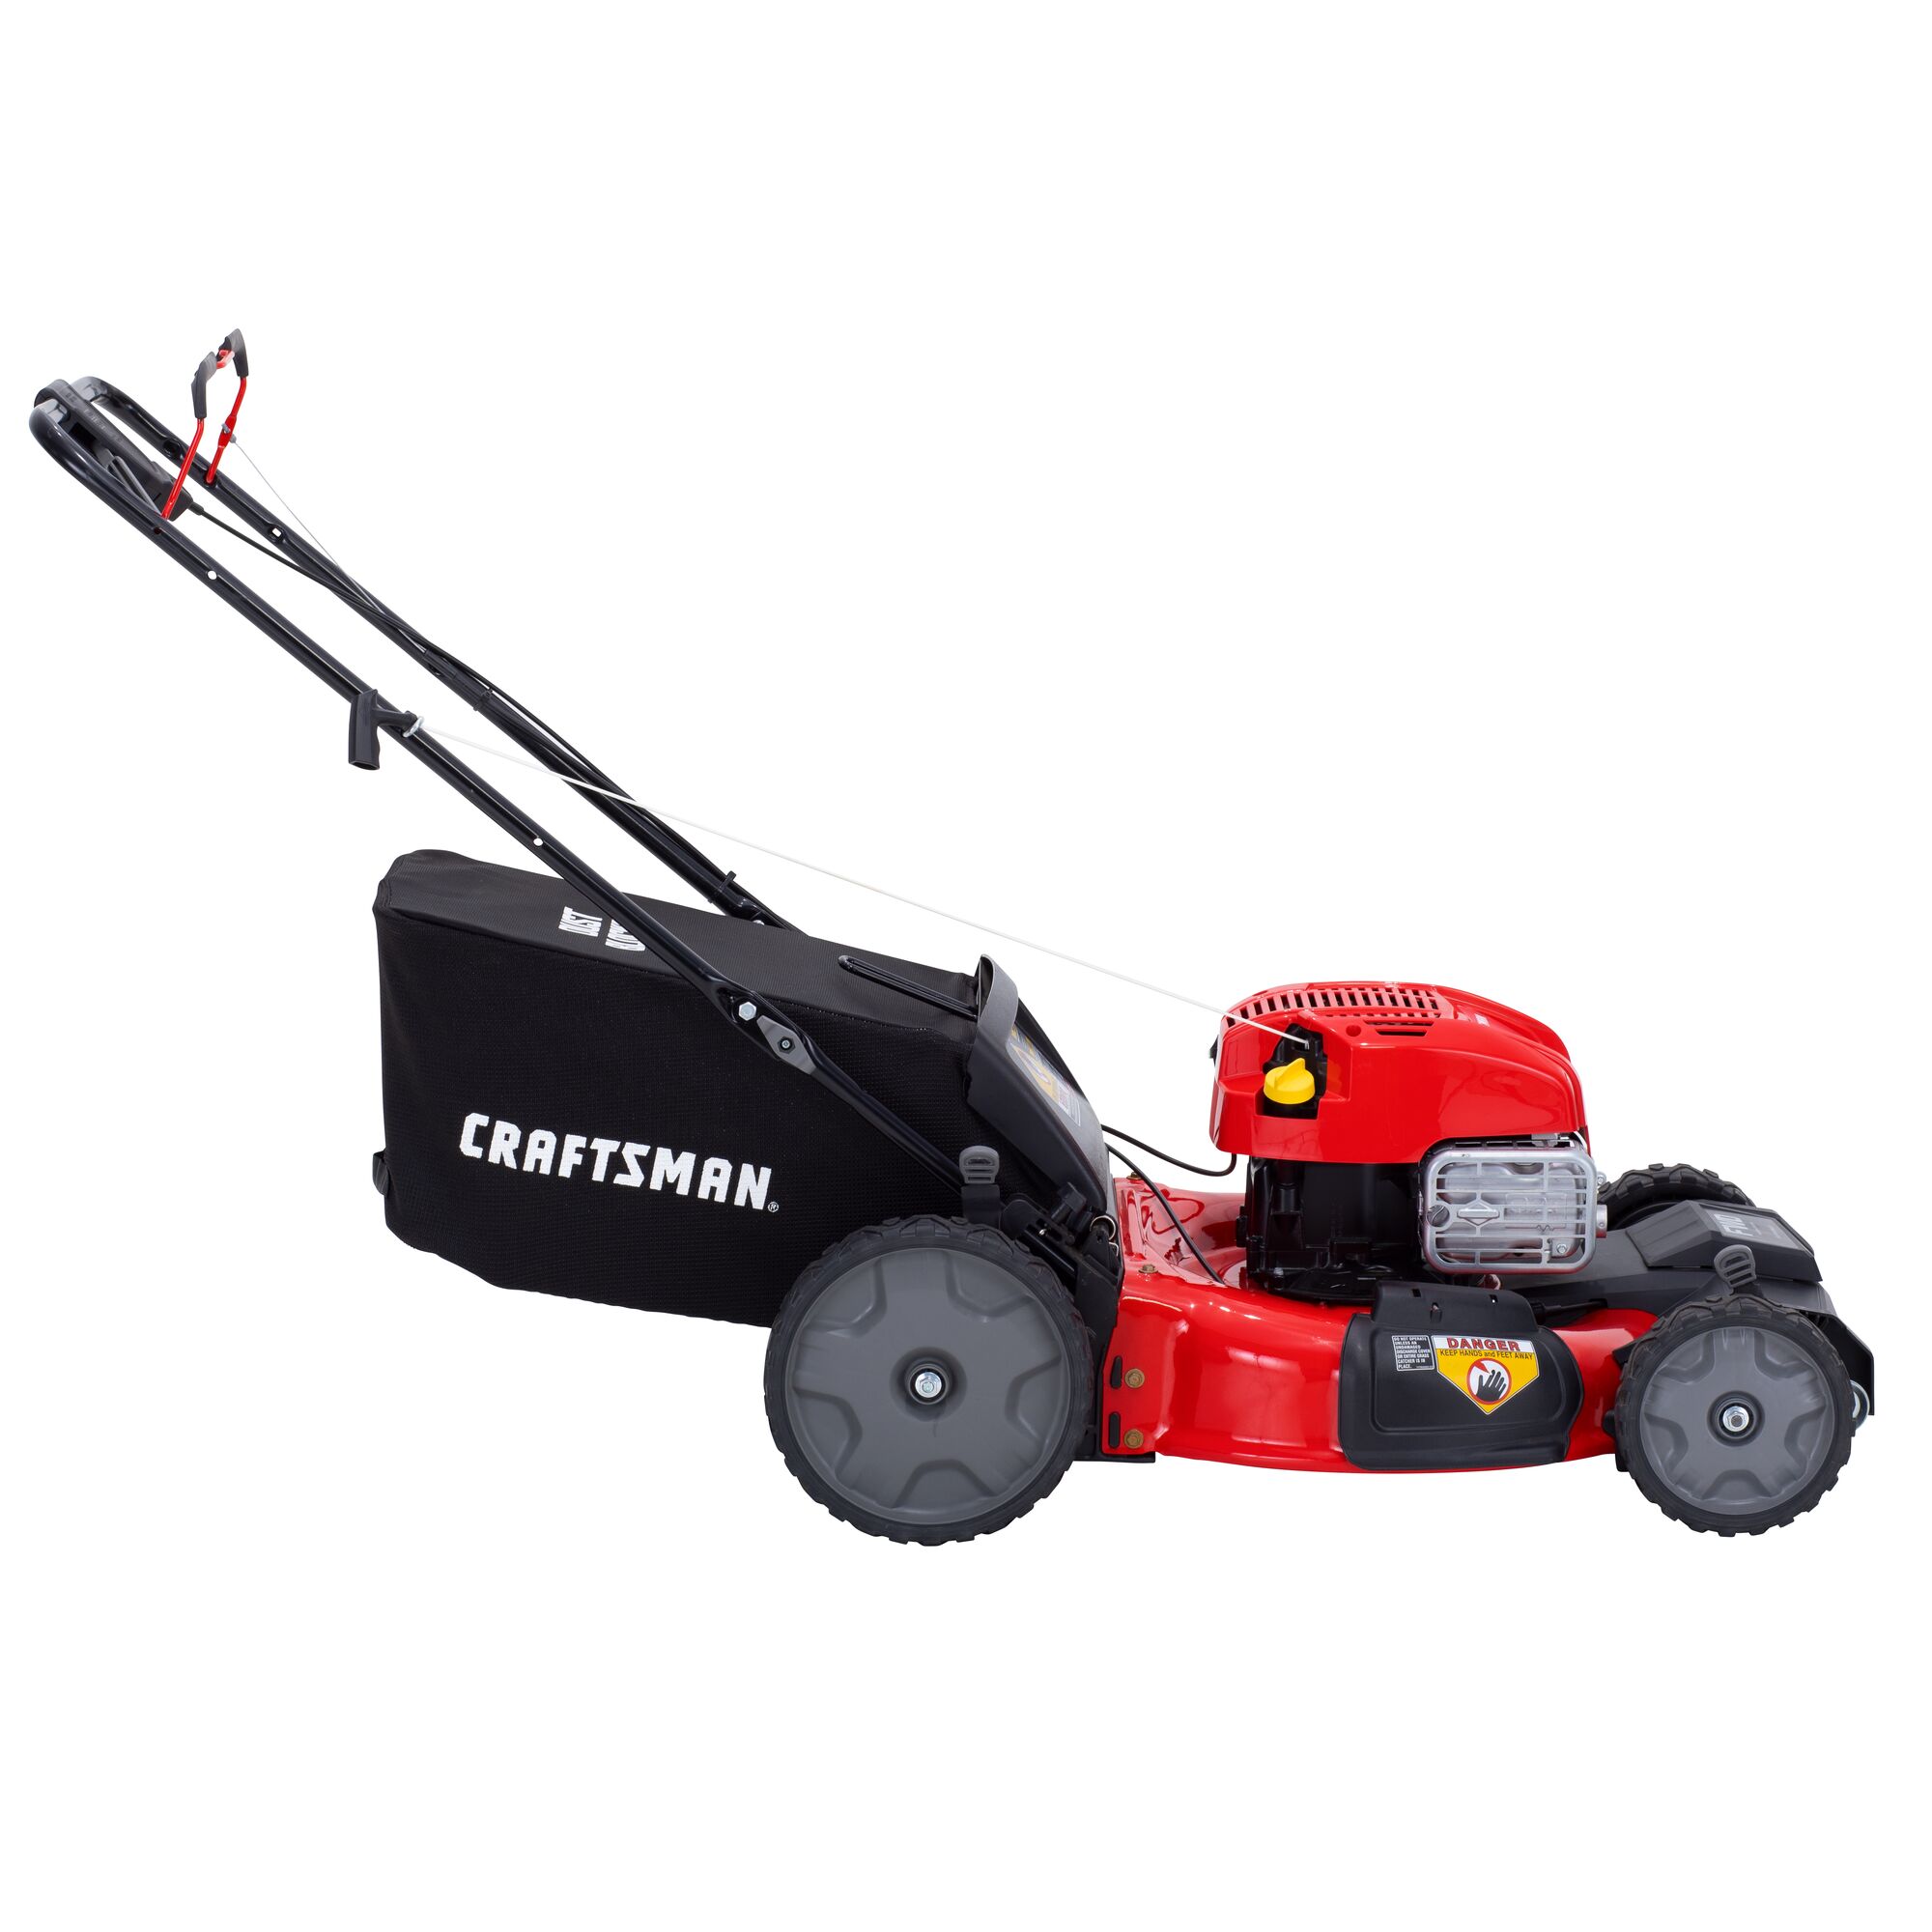 View of CRAFTSMAN Push Mowers on white background